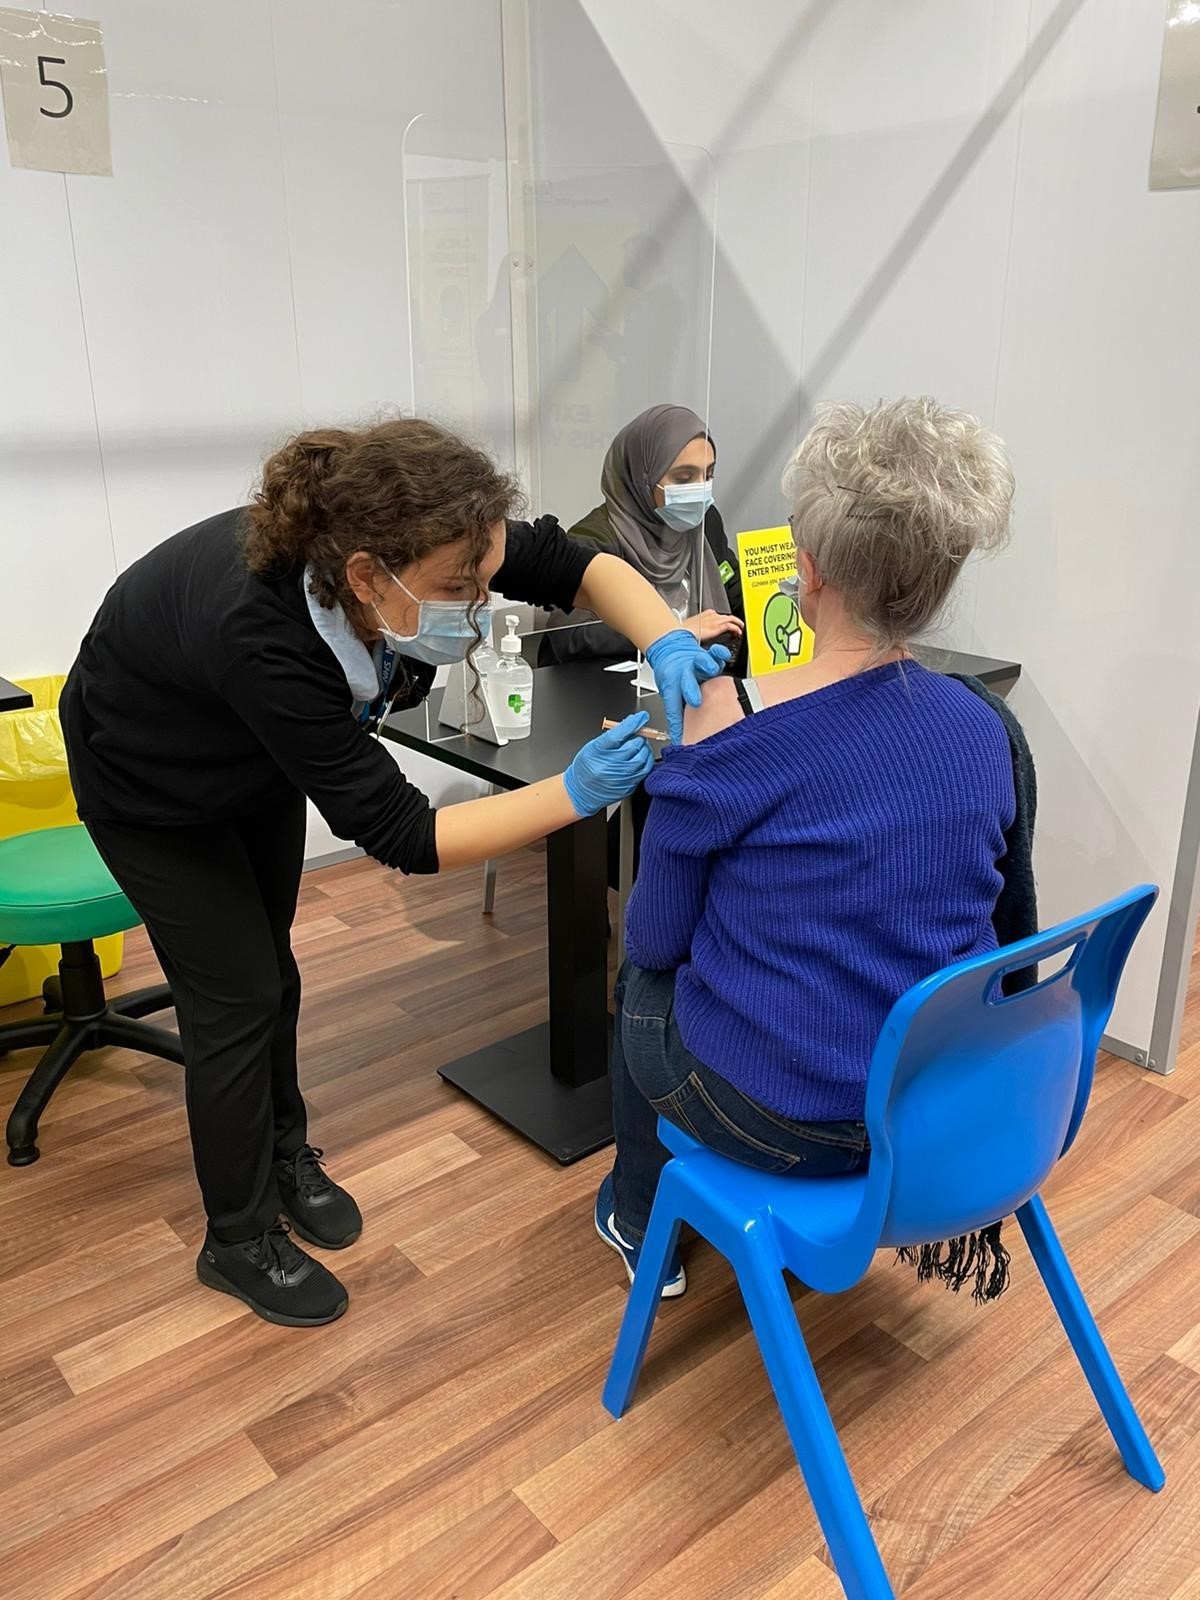 A patient receives a jab from a trainer member of Asda pharmacy staff inside one of the vaccination pods. Credit: Asda